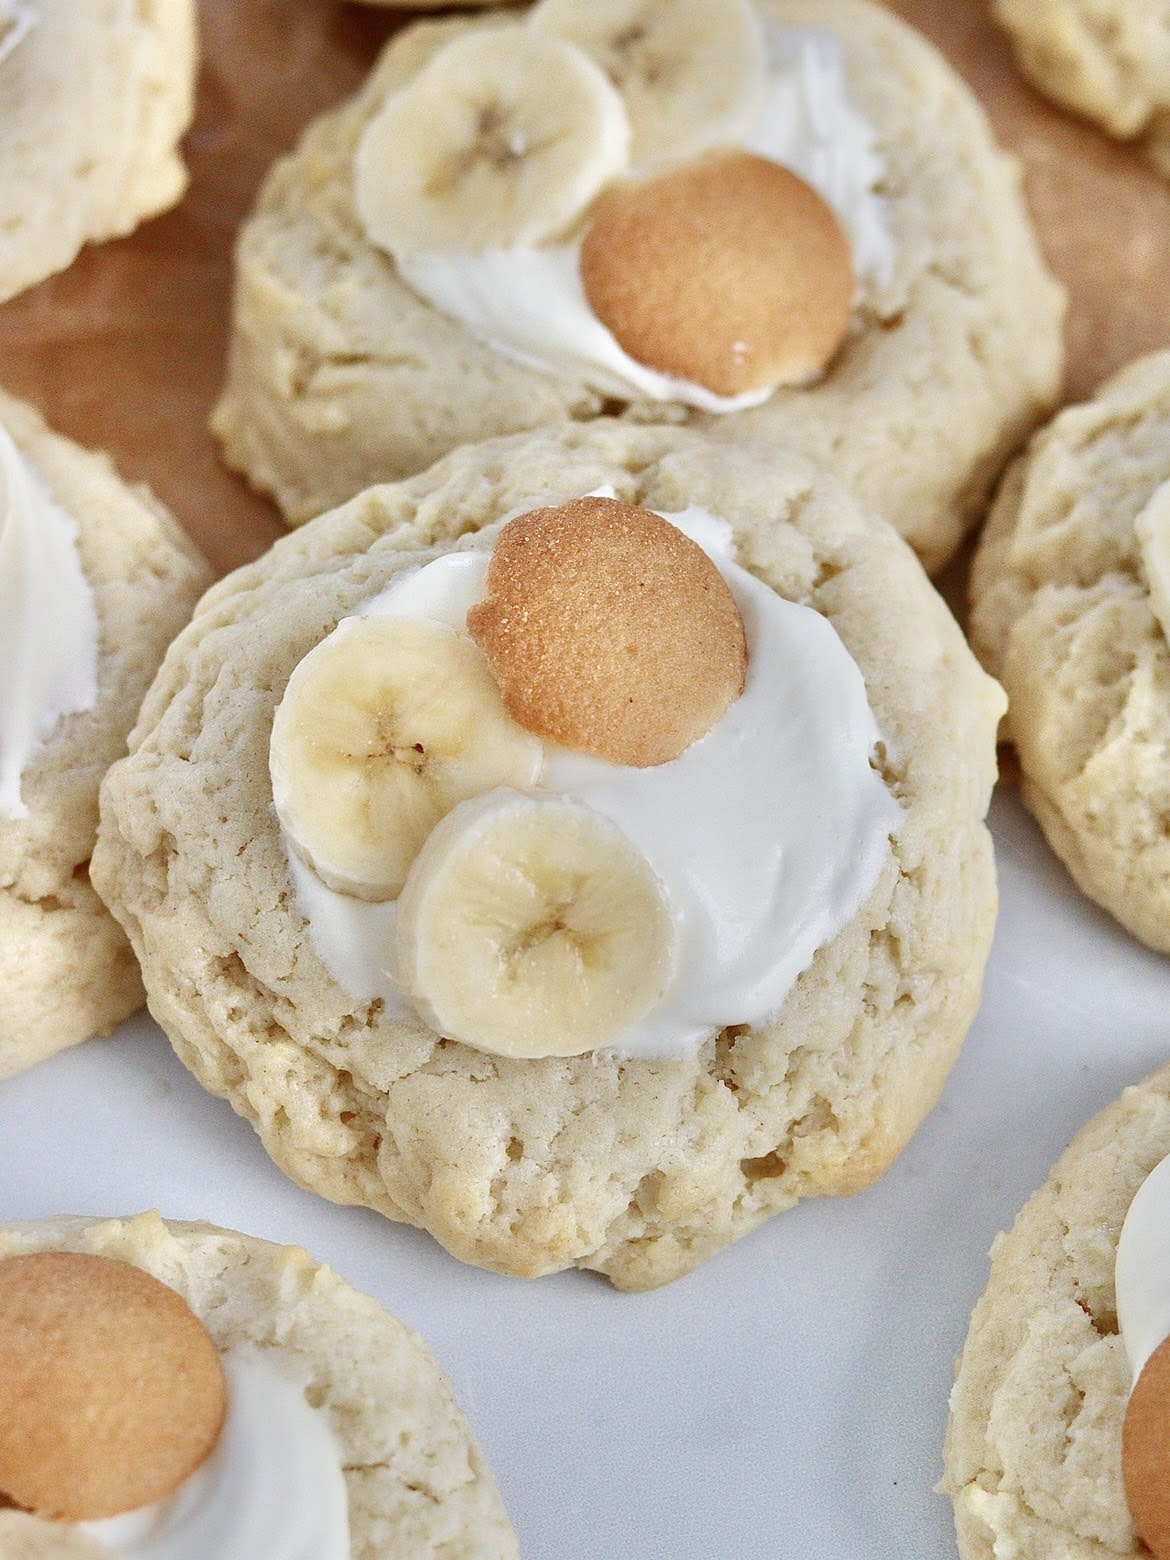 An up close photo of a banana cream pie cookie with other cookies in the background.